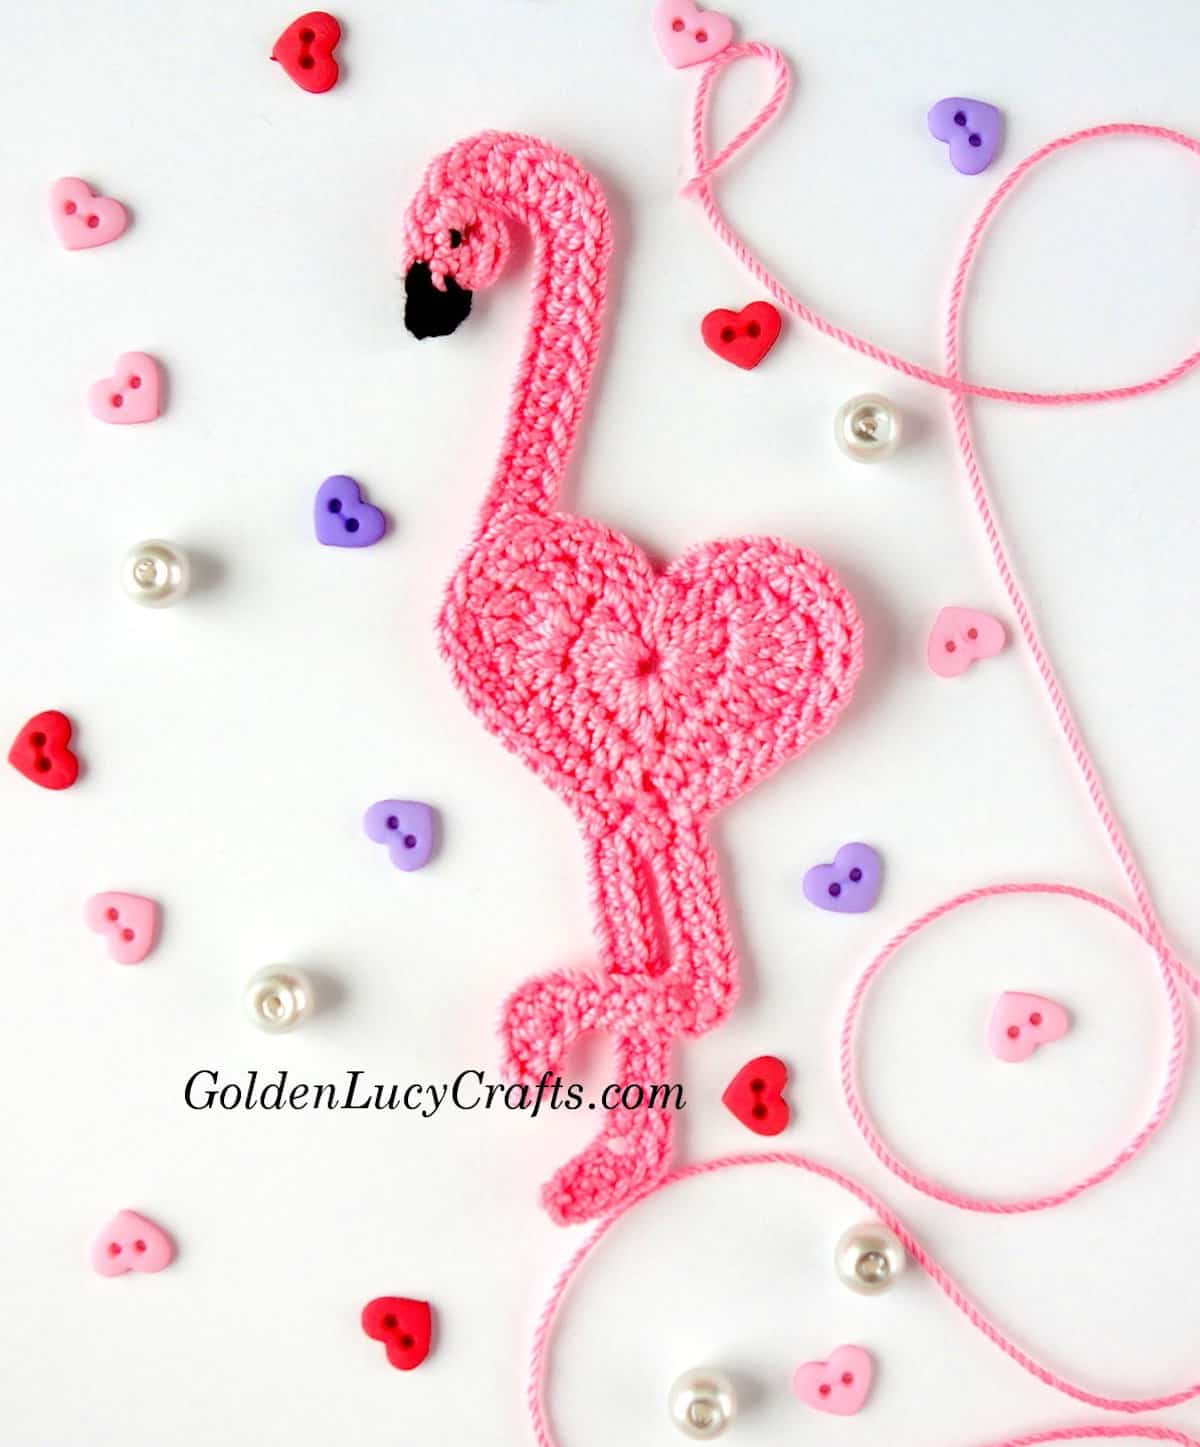 Crochet pink flamingo applique with heart-shaped body.